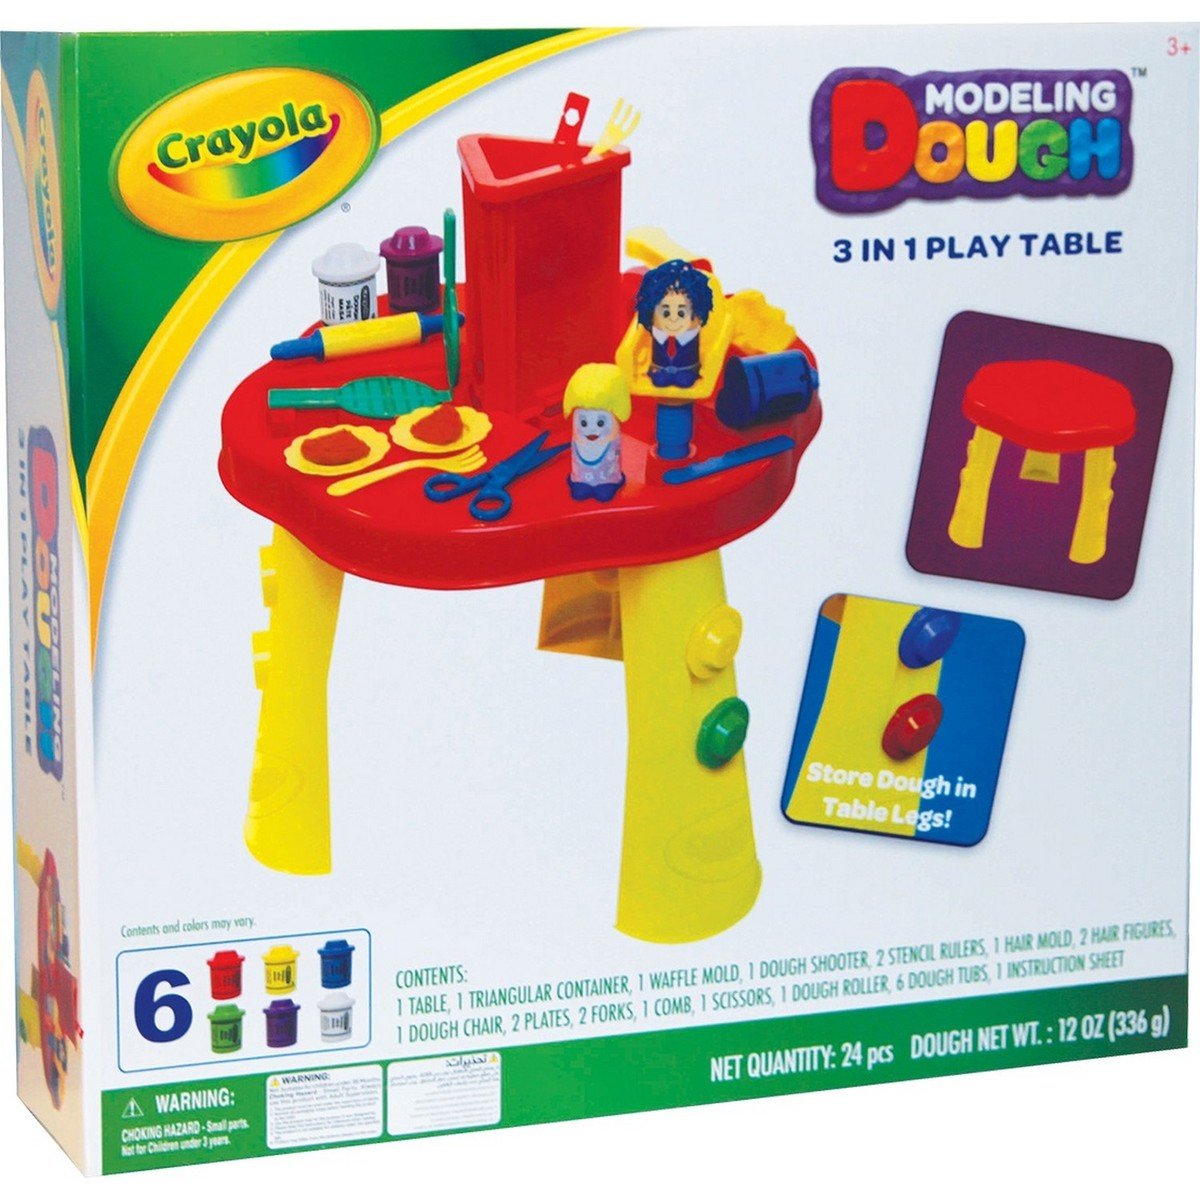 Crayola Modeling Dough 3in1 Play Table A11032 (Color may vary)